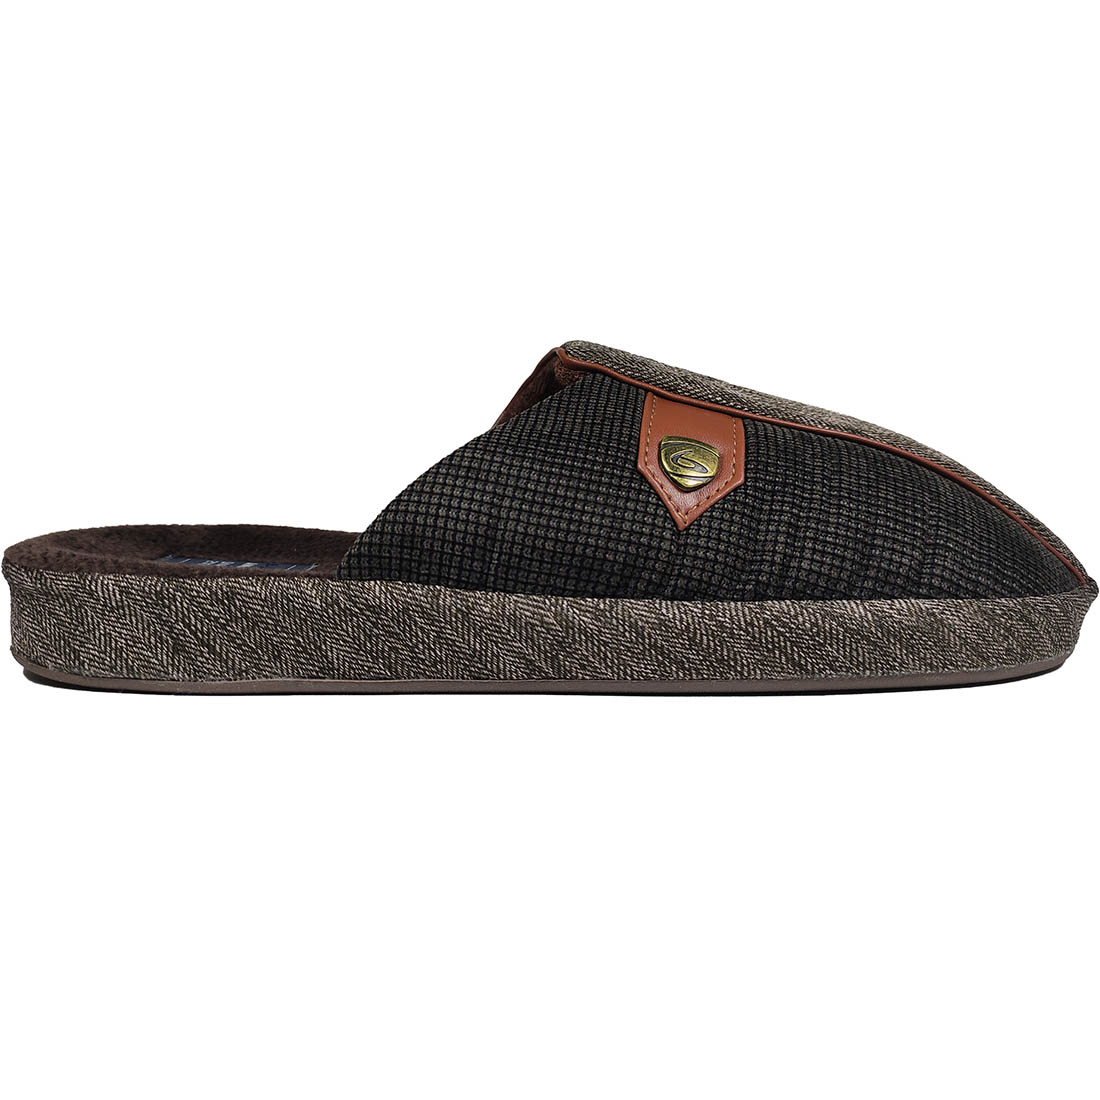 Anatomical Slippers B-Soft 222125 Brown